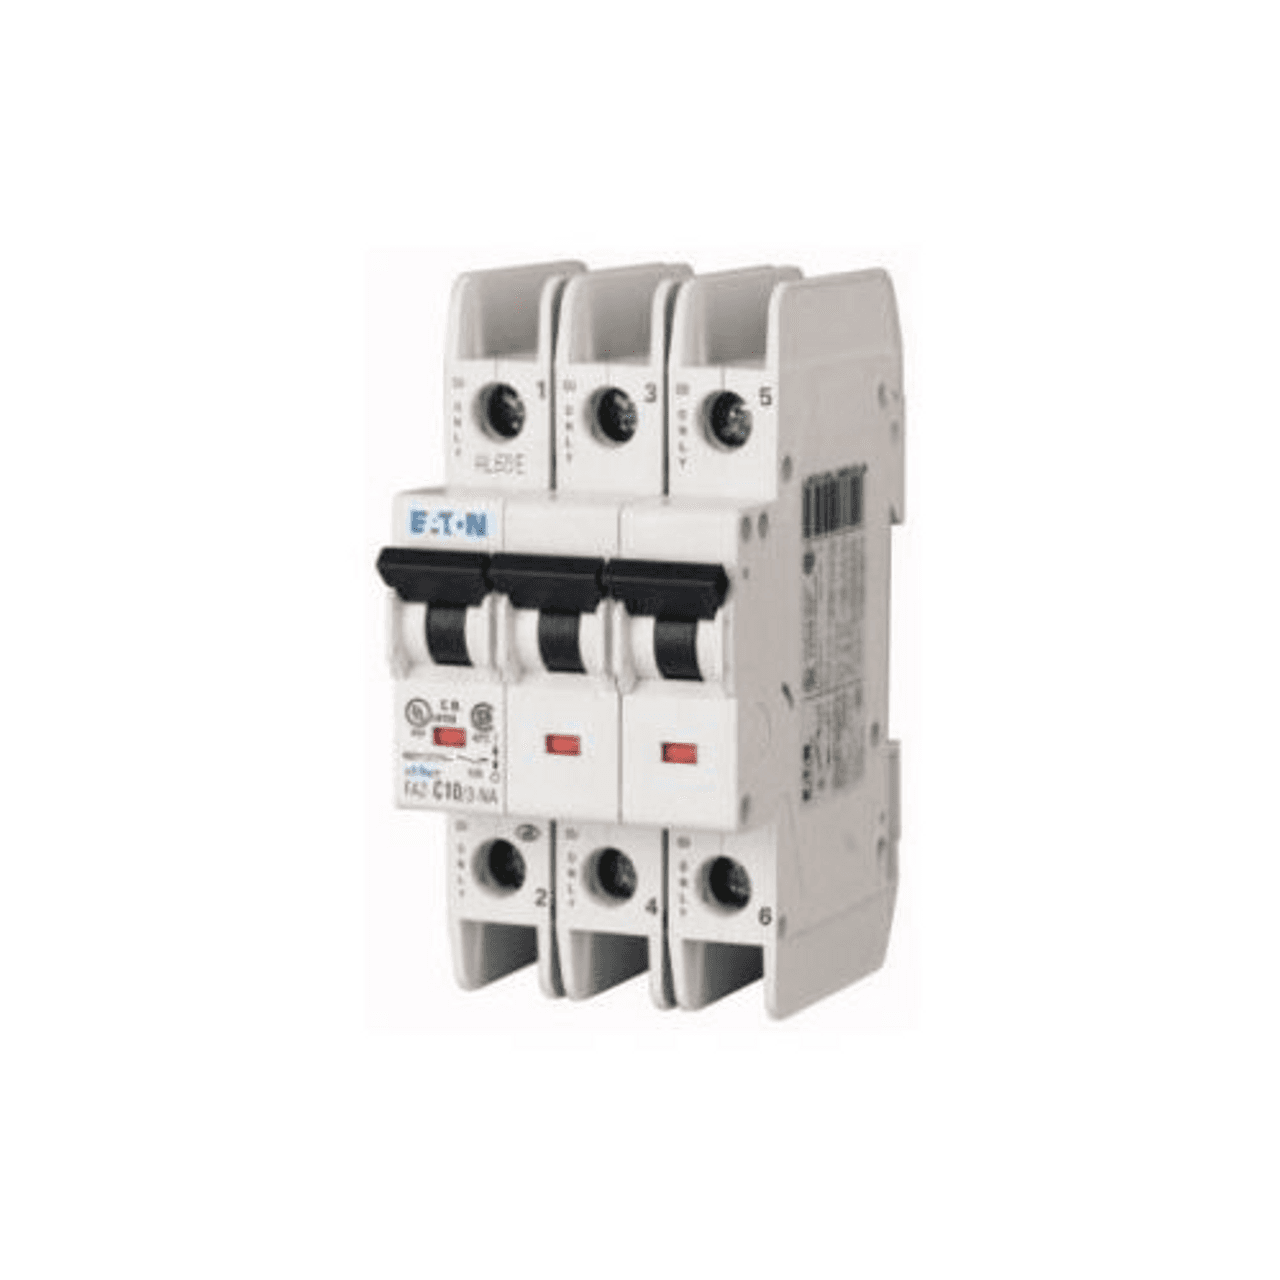 Eaton FAZ-C20/3-NA 277/480 VAC 50/60 Hz, 20 A, 3-Pole, 10/14 kA, 5 to 10 x Rated Current, Screw Terminal, DIN Rail Mount, Standard Packaging, C-Curve, Current Limiting, Thermal Magnetic